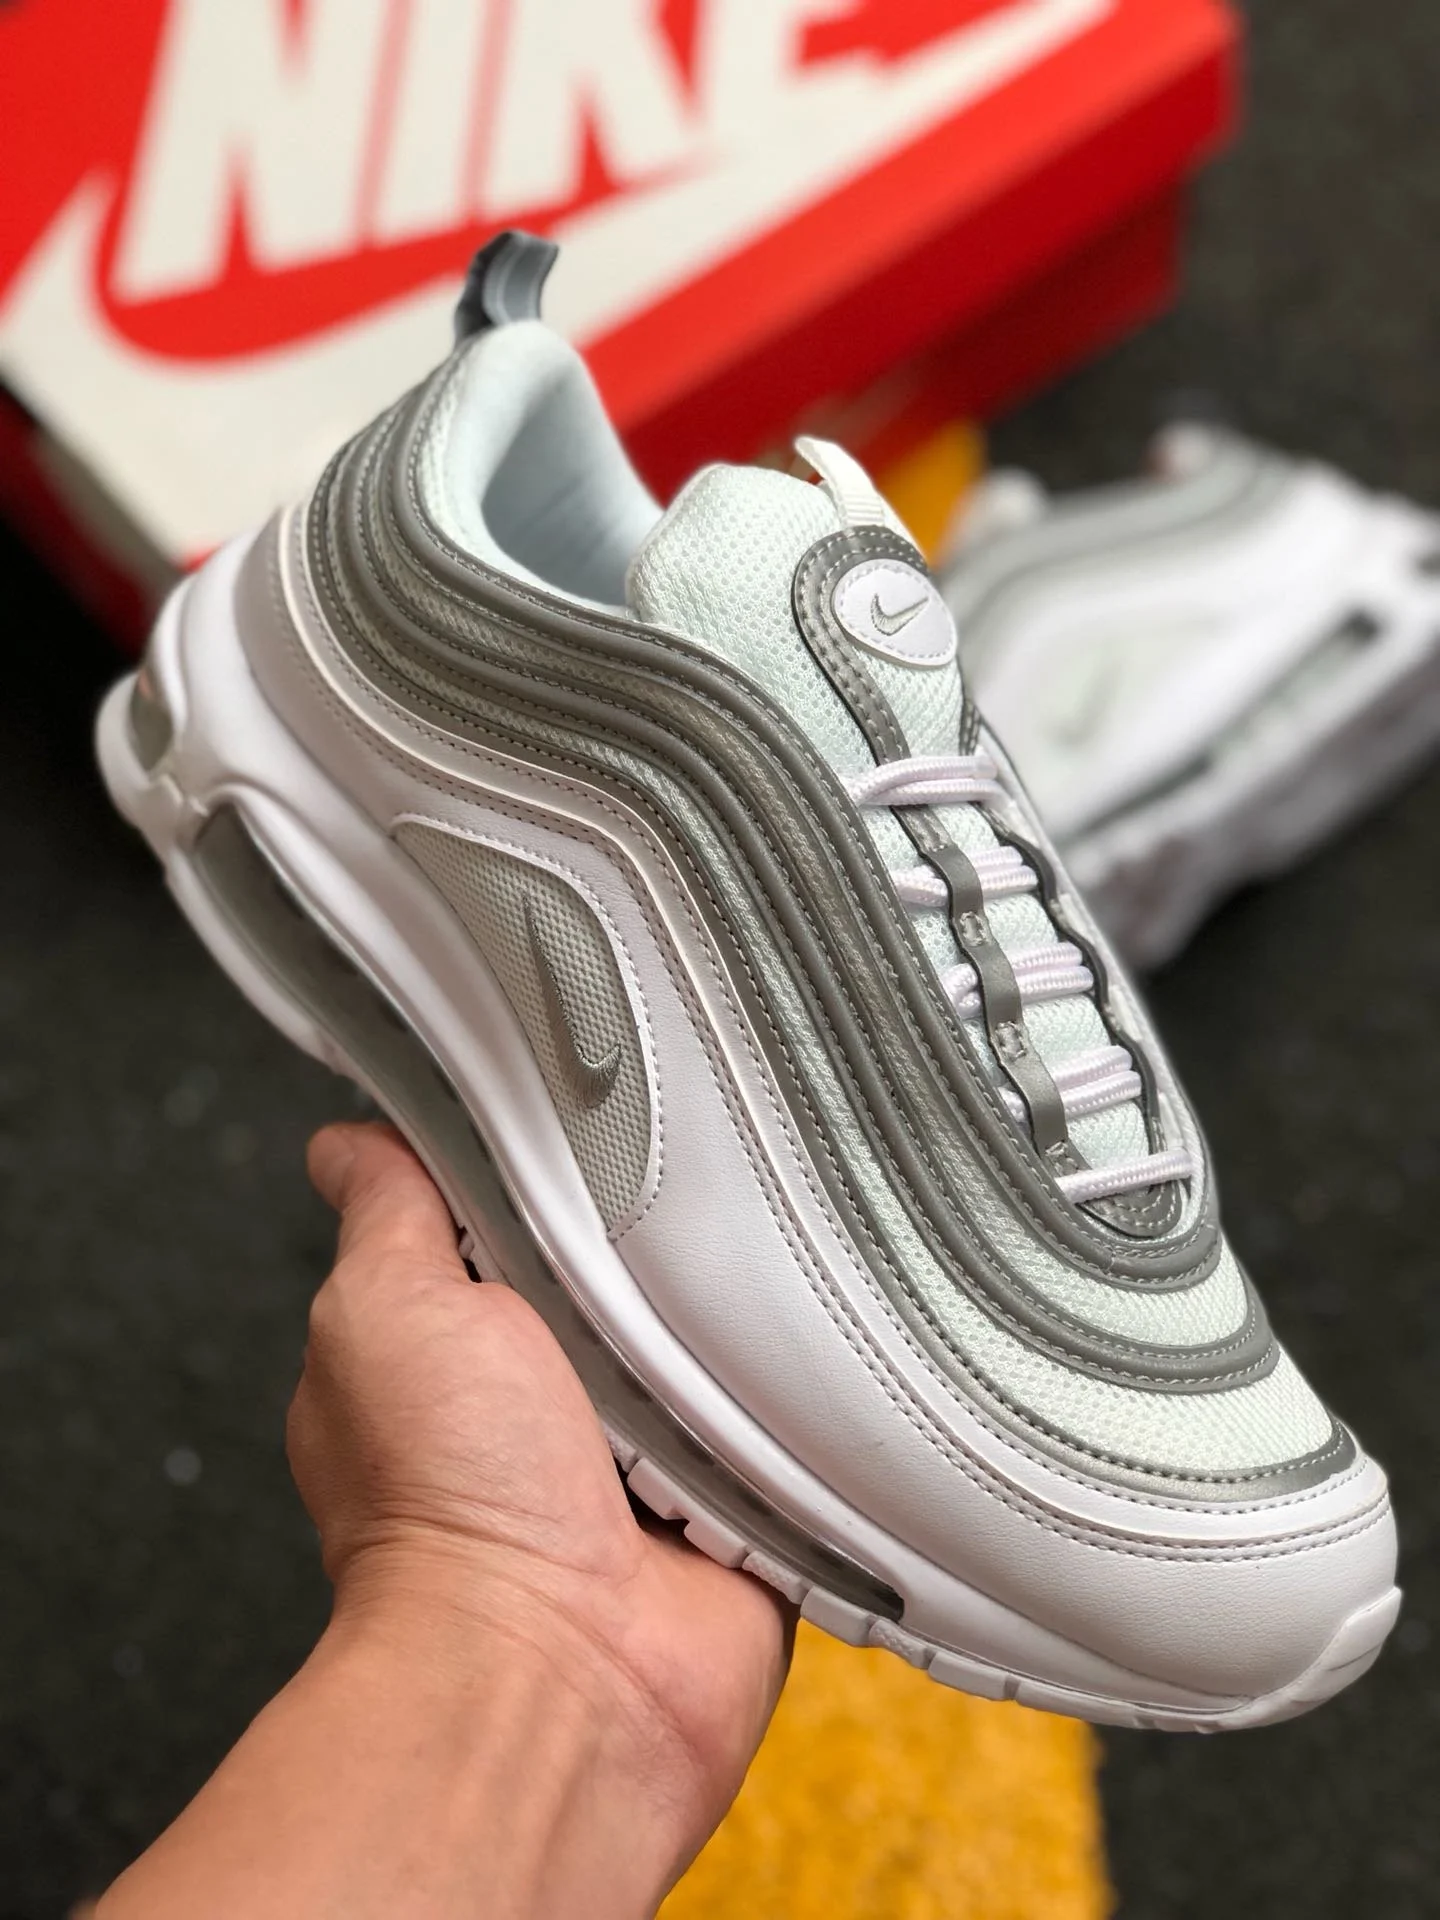 Nike Air Max 97 White Reflect Silver-Wolf Grey 921826-105 On Sale